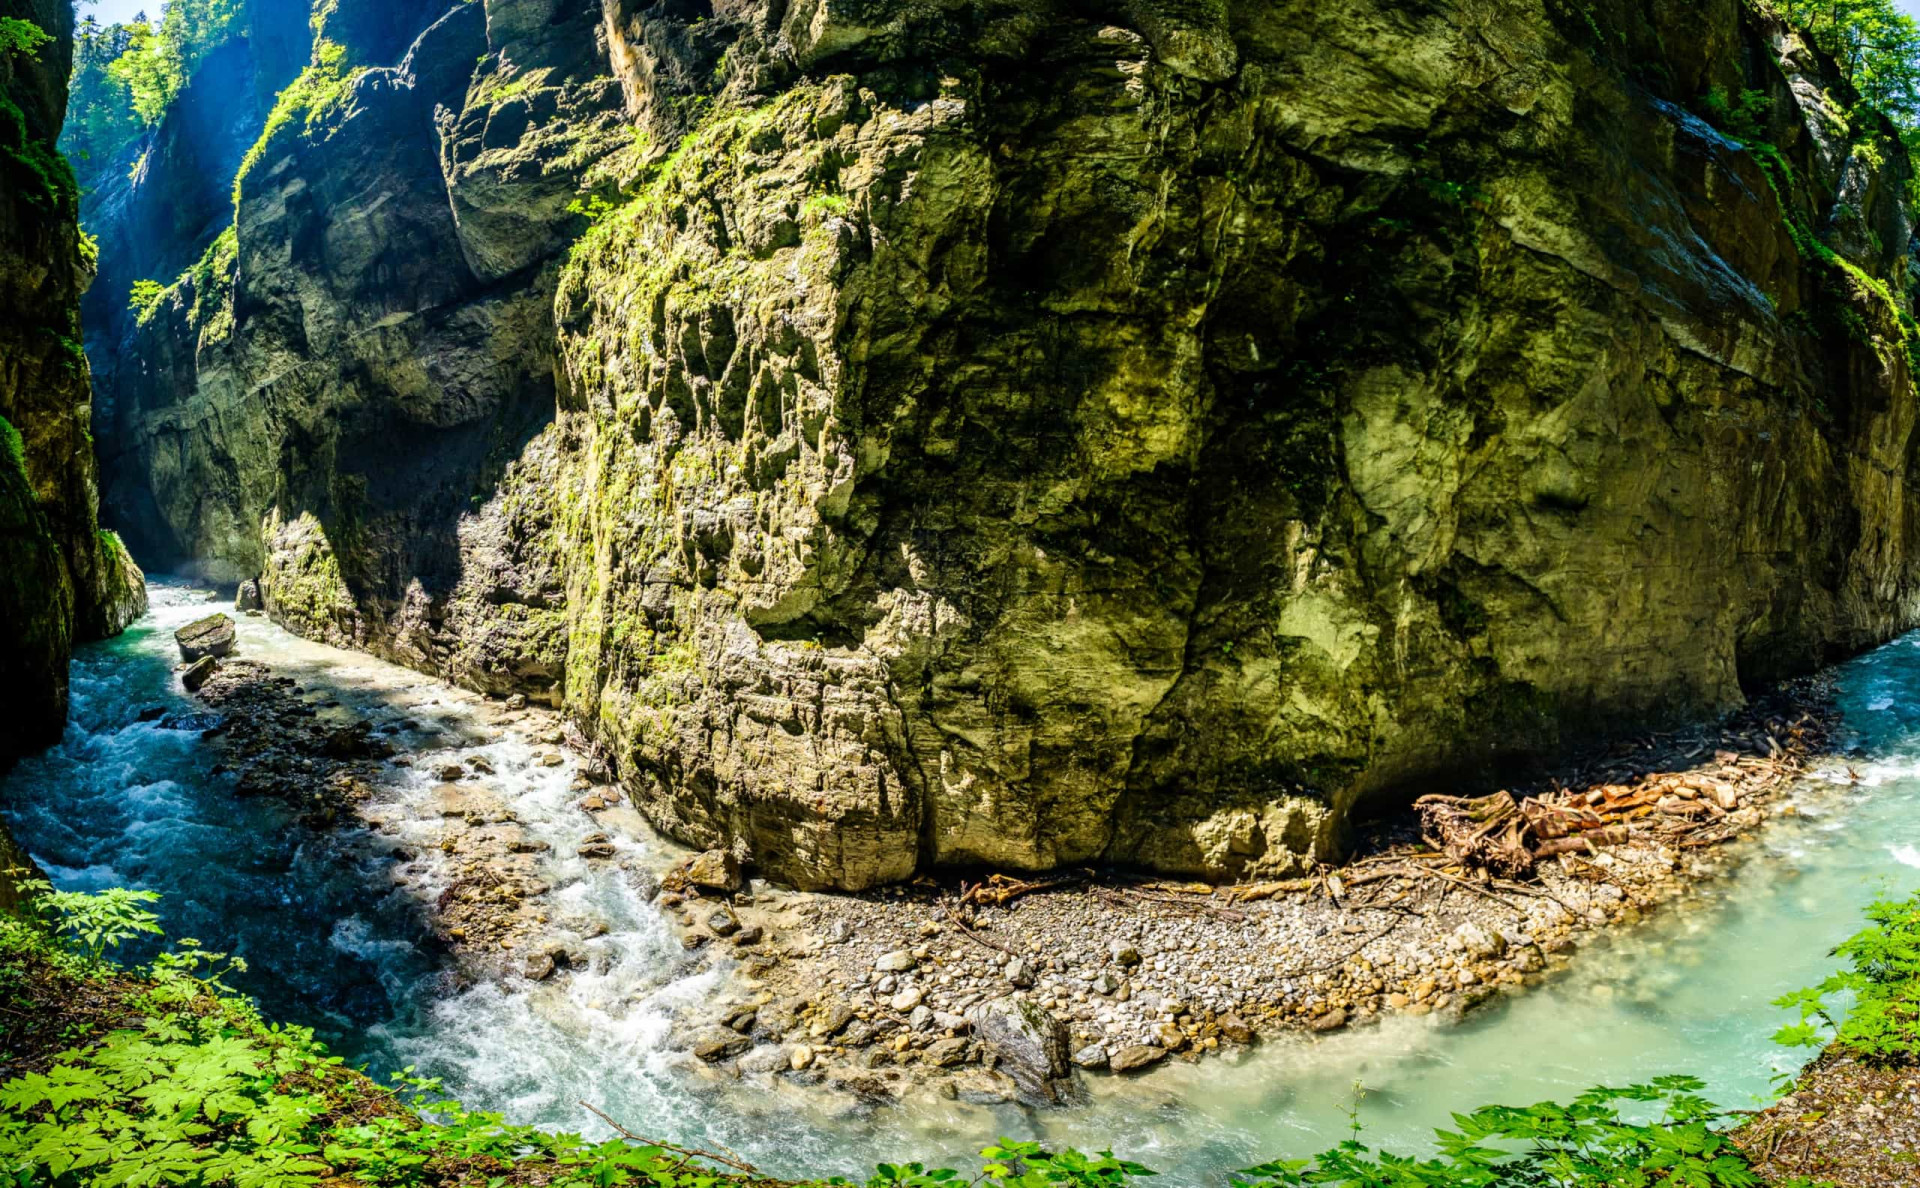 <p>One of Bavaria's most impressive natural wonders, the Partnach Gorge in Garmisch-Partenkirchen rises to a height of 80 m (263 ft) in places. It's been incised over centuries by a restless stream to produce one of the most popular hiking destinations in the region.</p><p>You may also like:<a href="https://www.starsinsider.com/n/484804?utm_source=msn.com&utm_medium=display&utm_campaign=referral_description&utm_content=481885v1en-us"> What your aura says about you</a></p>